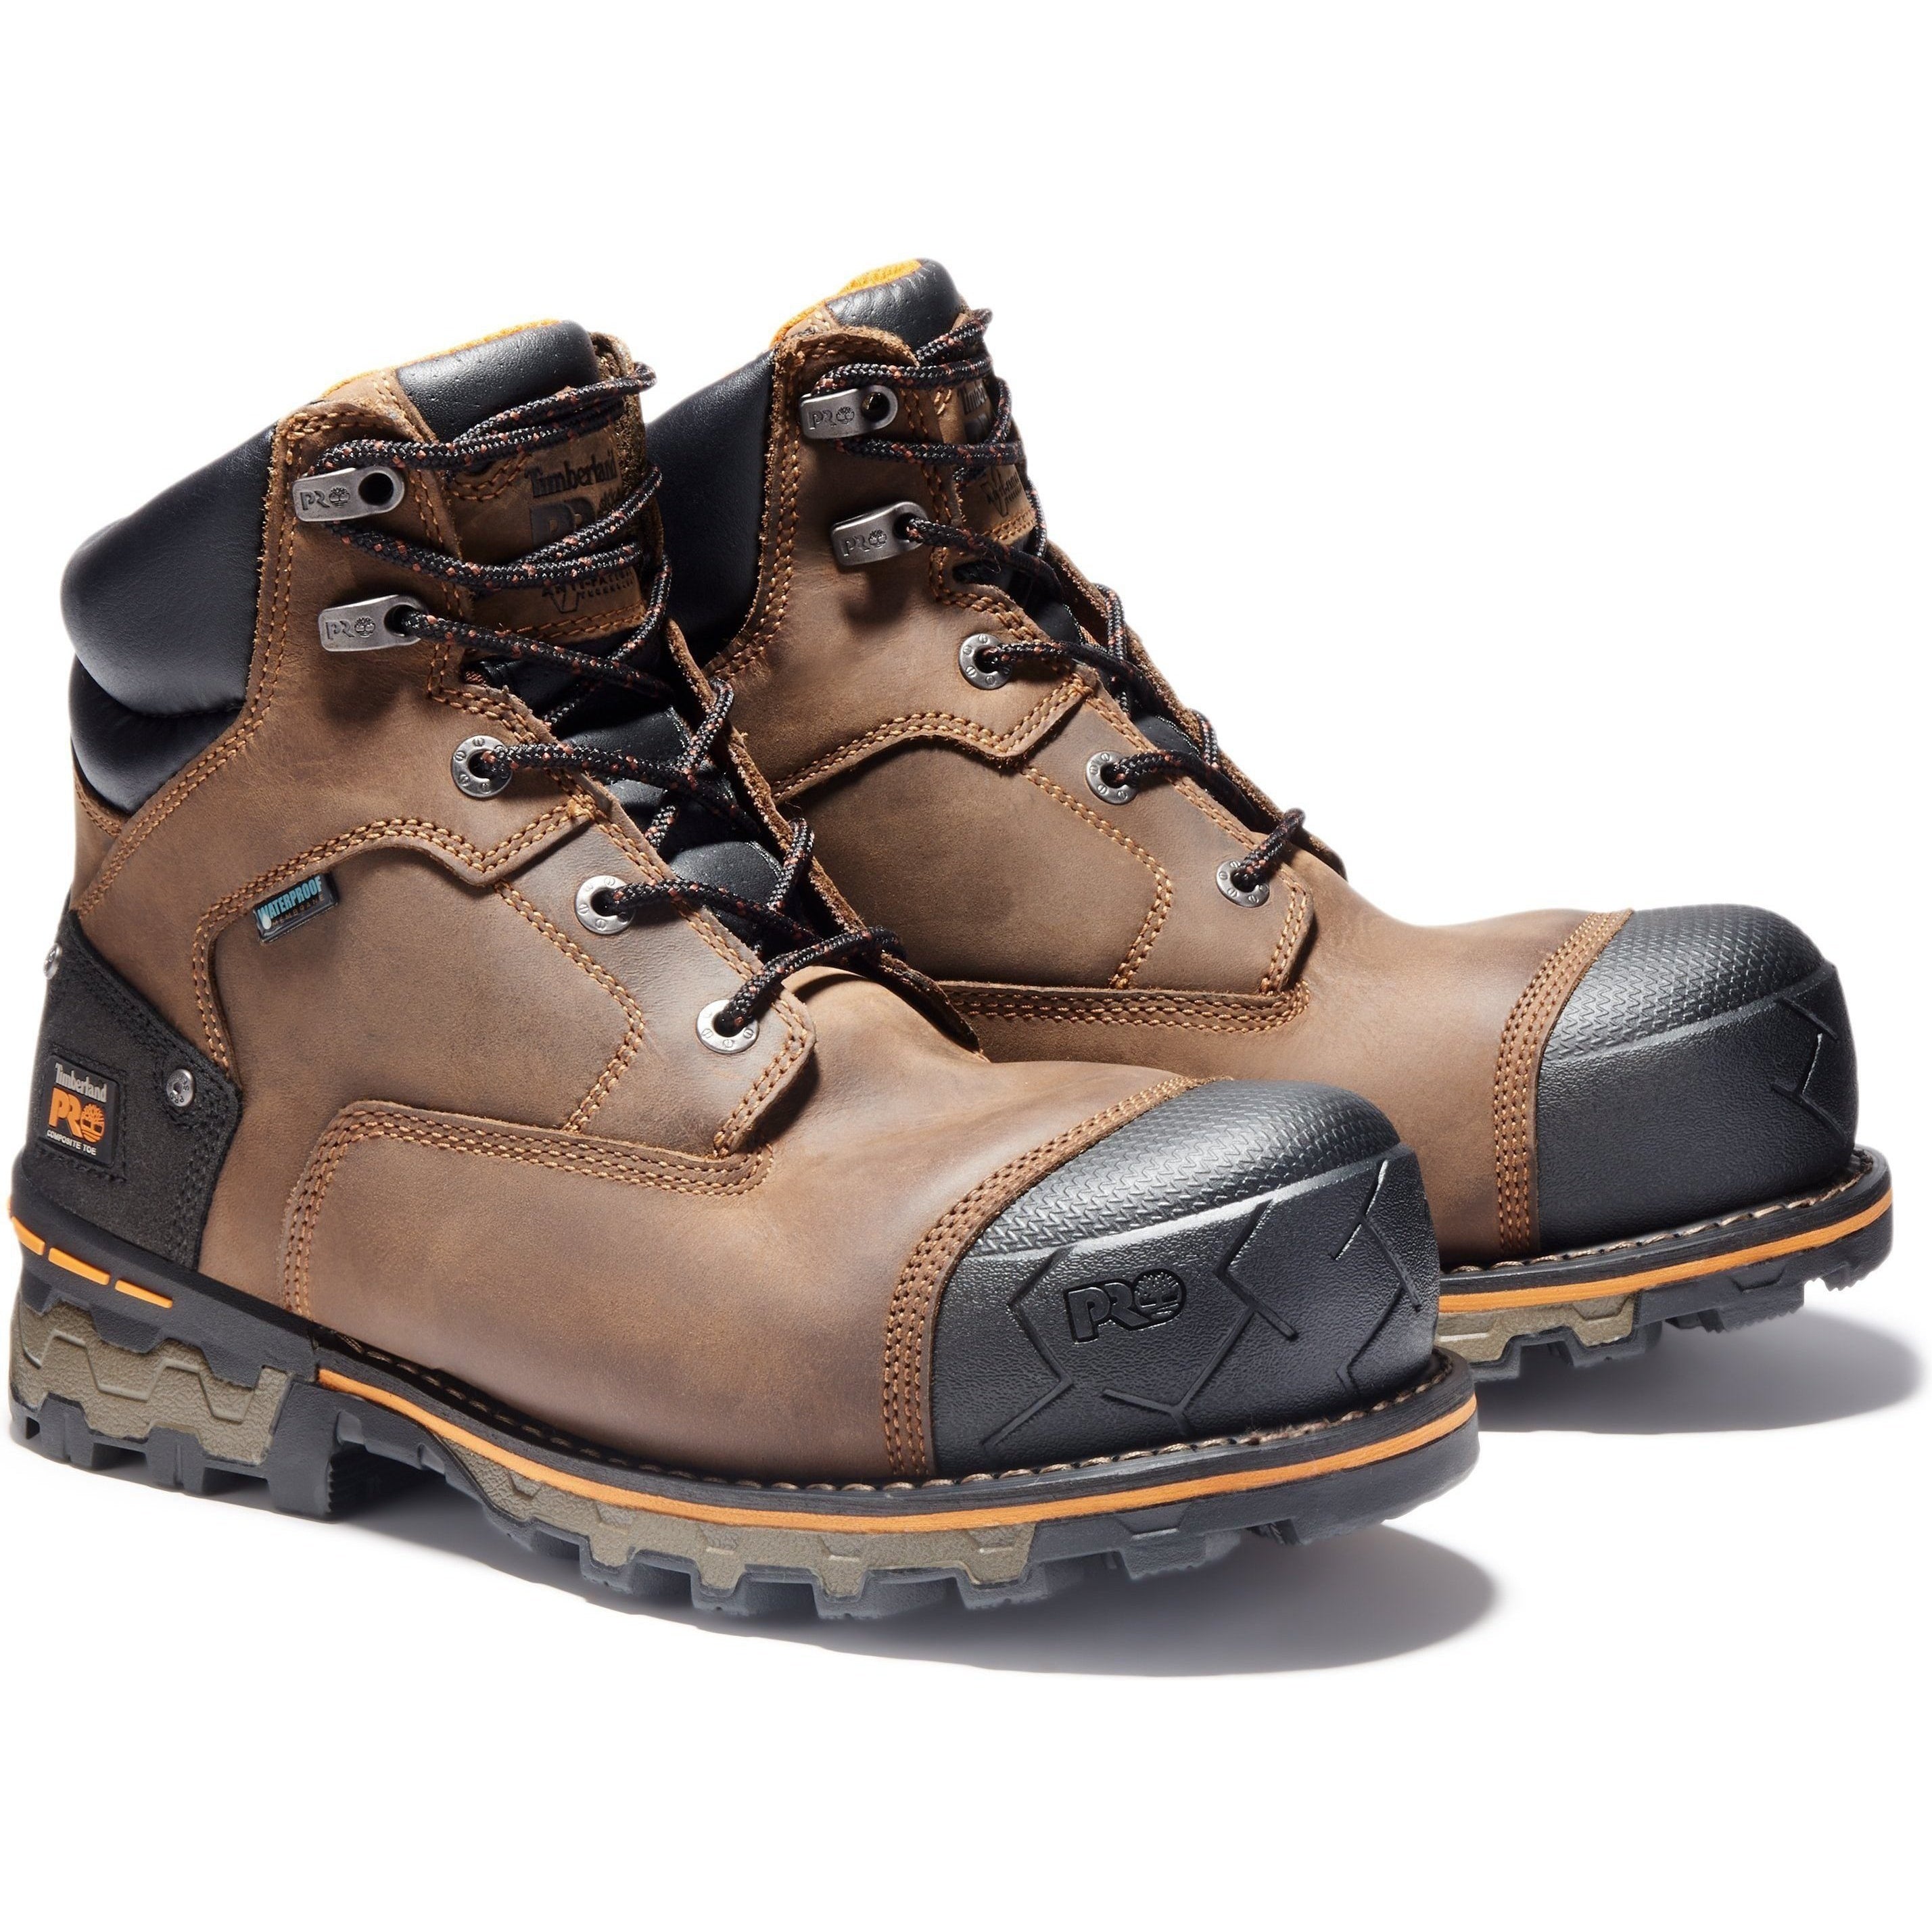 Timberland PRO Men's Boondock 6" Comp Toe WP Work Boots - TB092615214 7 / Medium / Brown Oiled Distressed - Overlook Boots